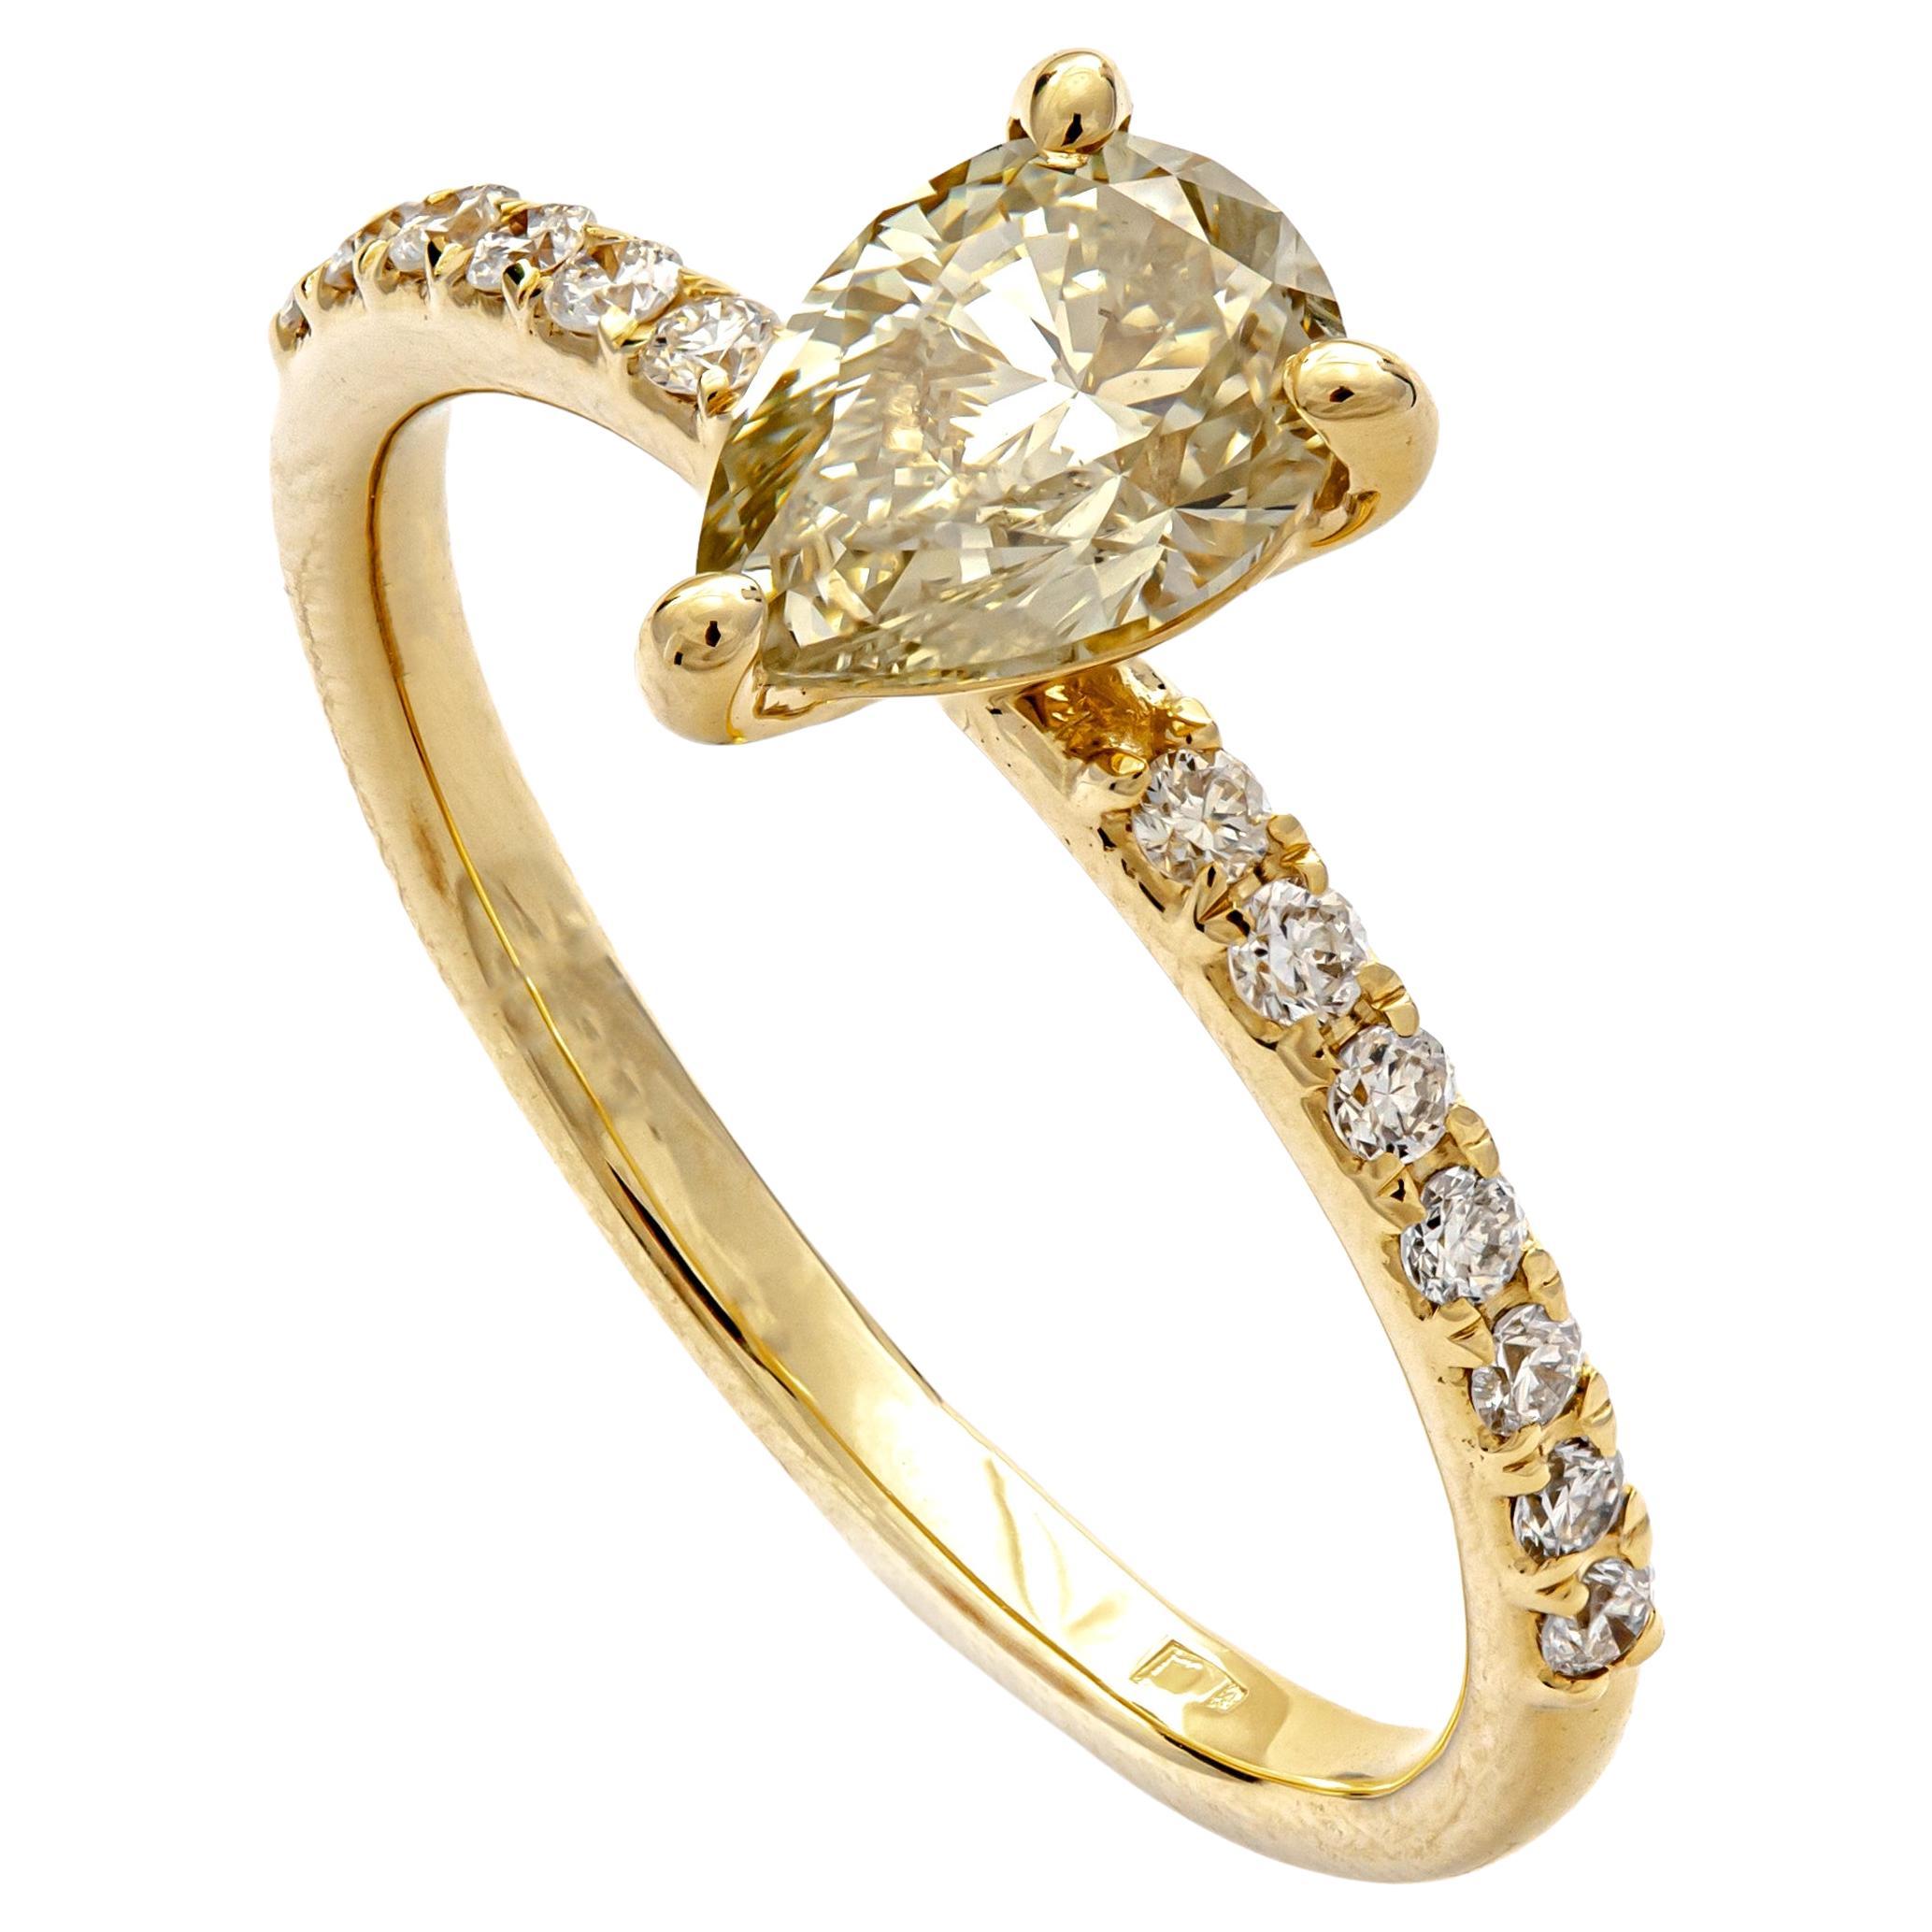 This lot is offered without any reserve price, starting bid $1, highest bid wins.

Elegant ring set with 0.90 ct Natural Fancy Light Grayish Greenish Yellow Pear Diamond at the center of a 14k White Gold frame accented by 0.16 ct Natural White